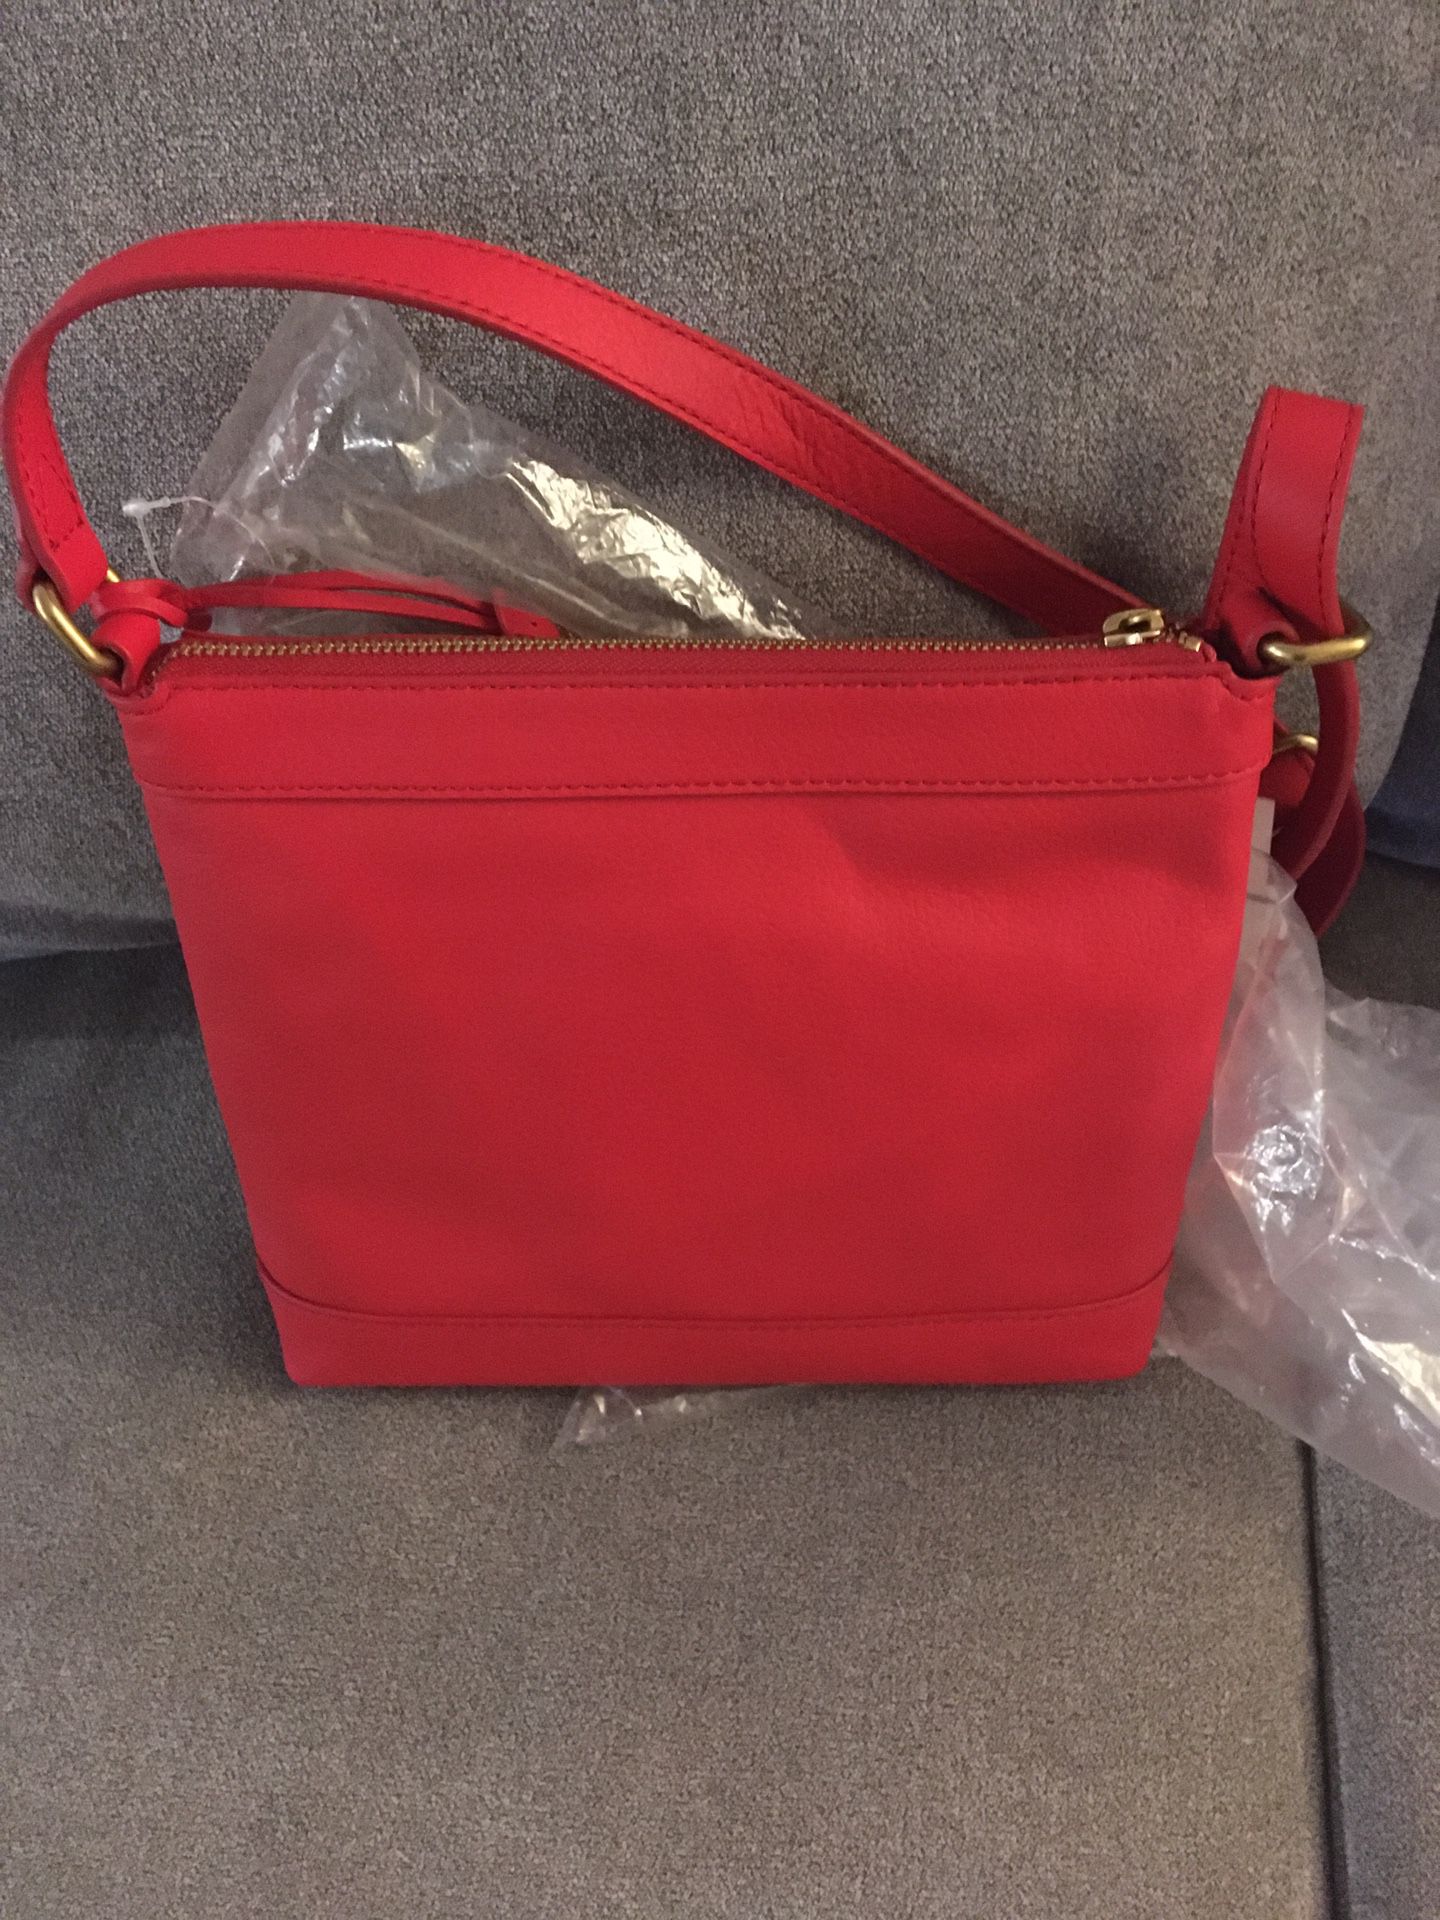 Christmas Red Fossil purse NEW